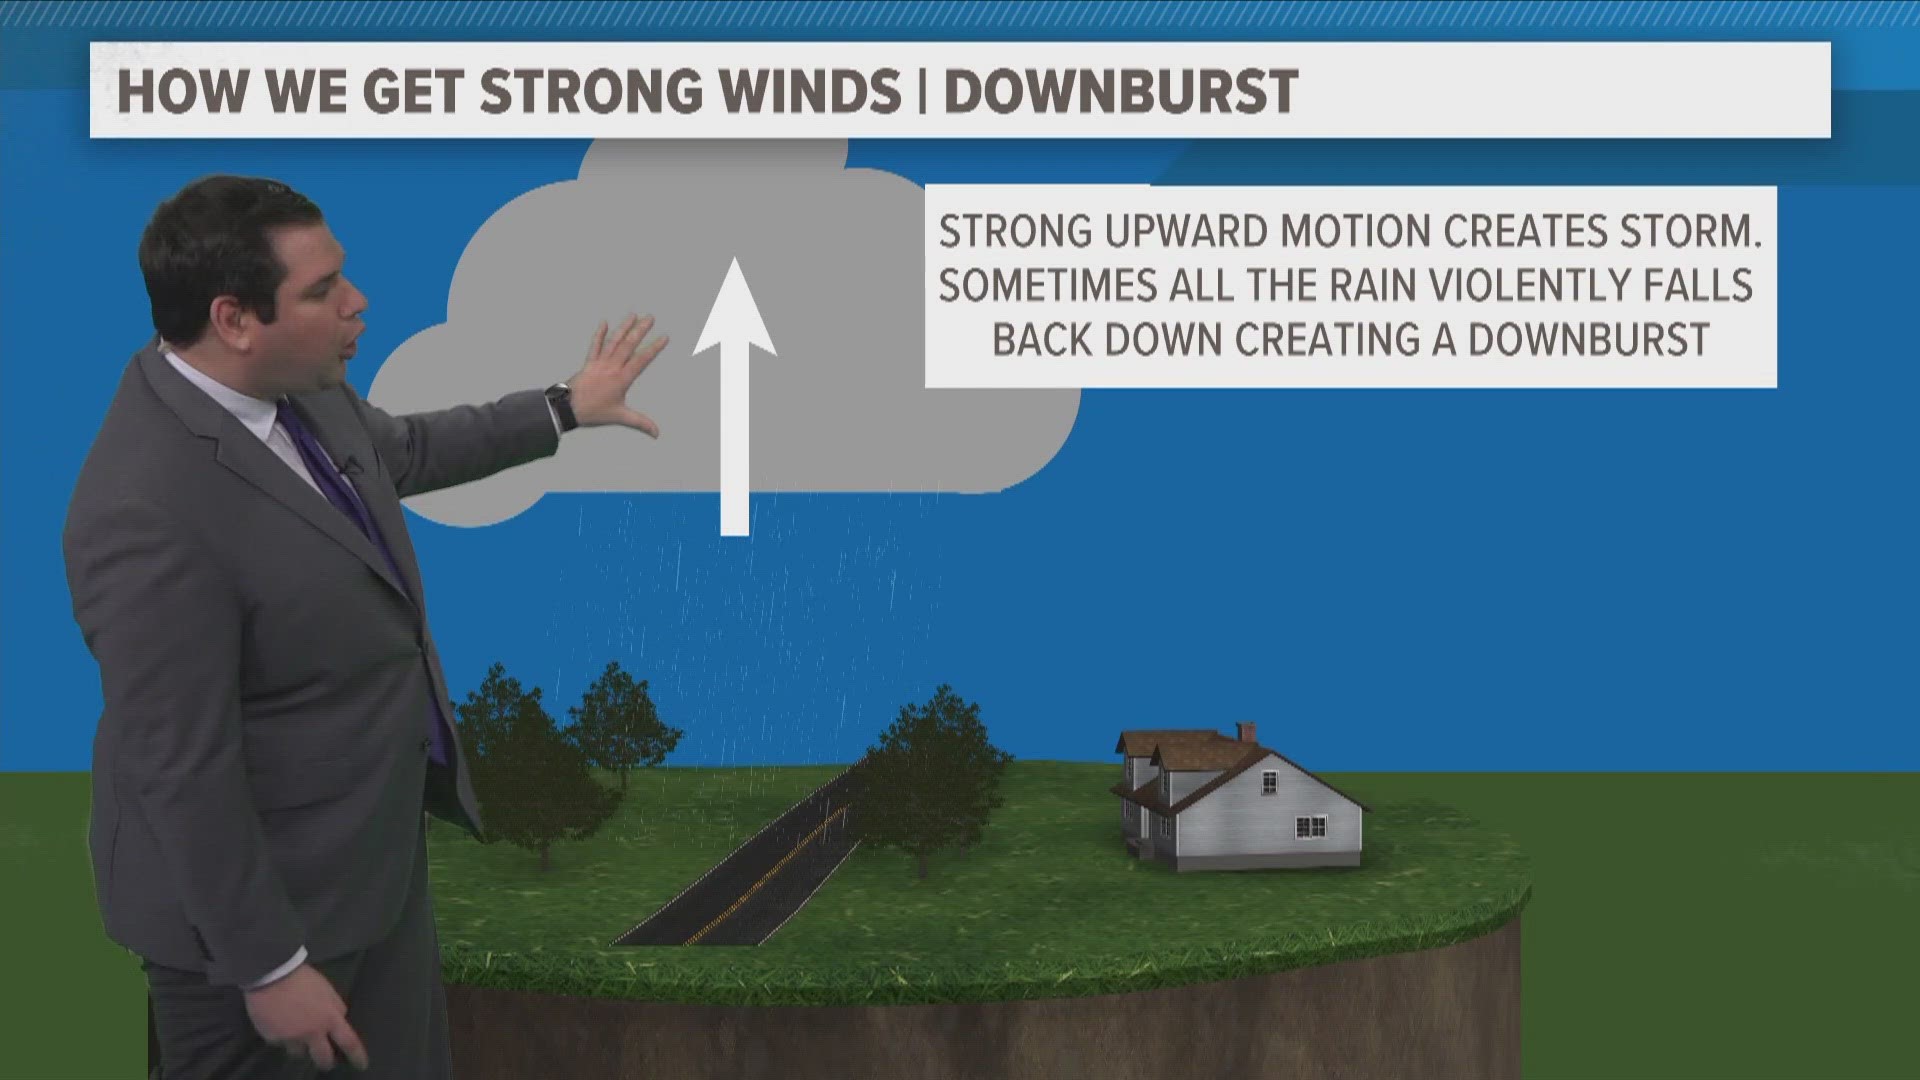 Severe storms can create strong winds that can cause widespread damage during the Spring and Summer.